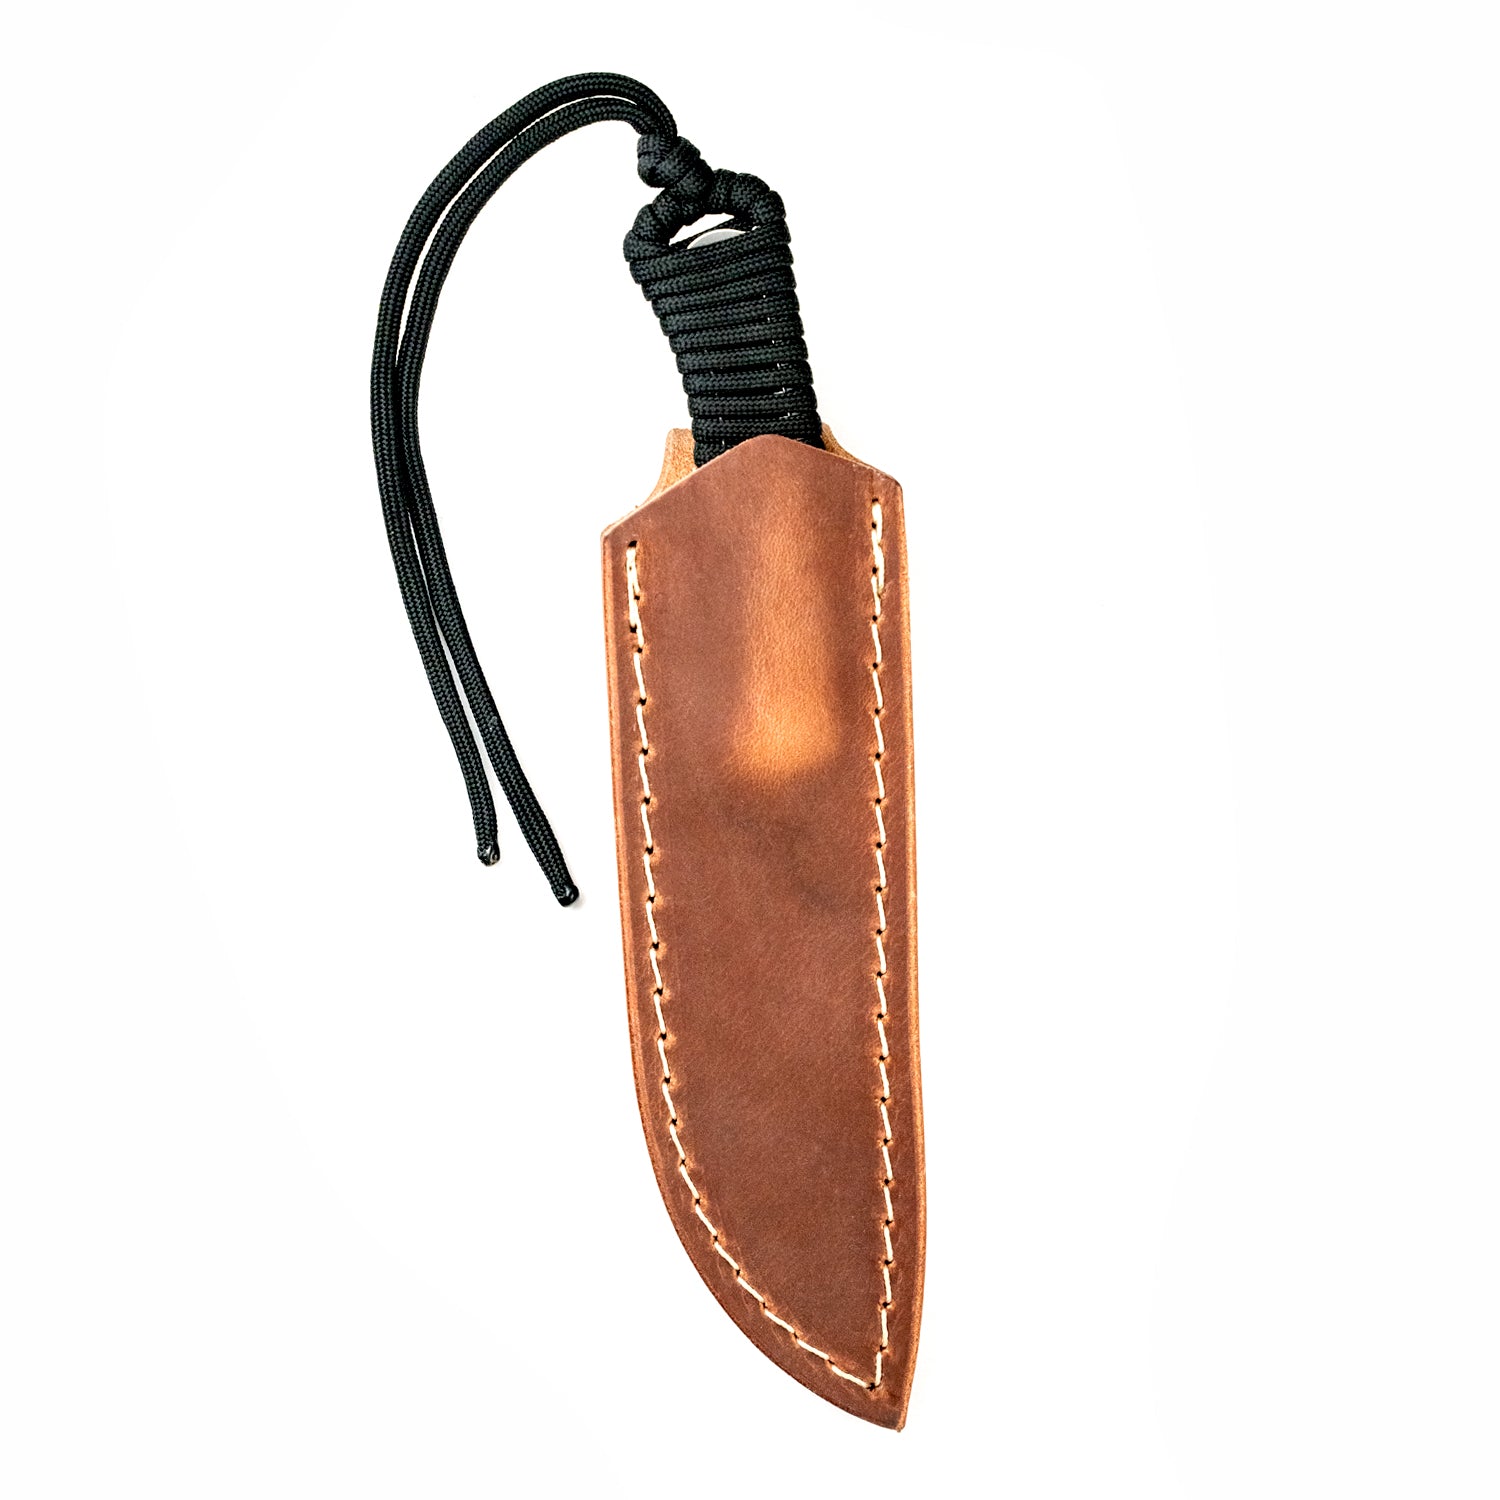 STONED GOAT 2.0 LEATHER SHEATH - VERTICAL BELT CARRY